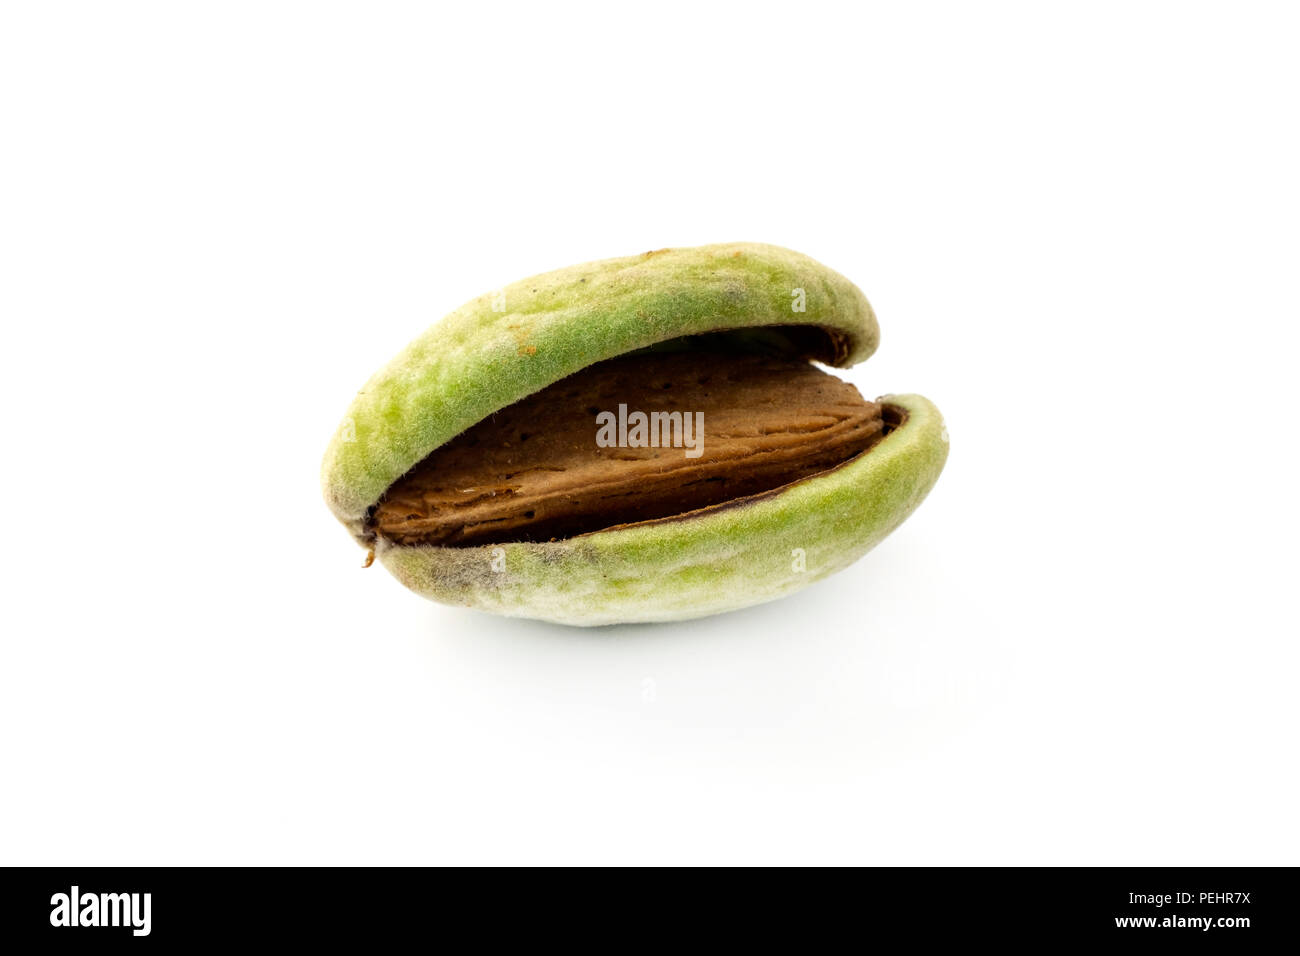 Almond in its hull on a white background Stock Photo